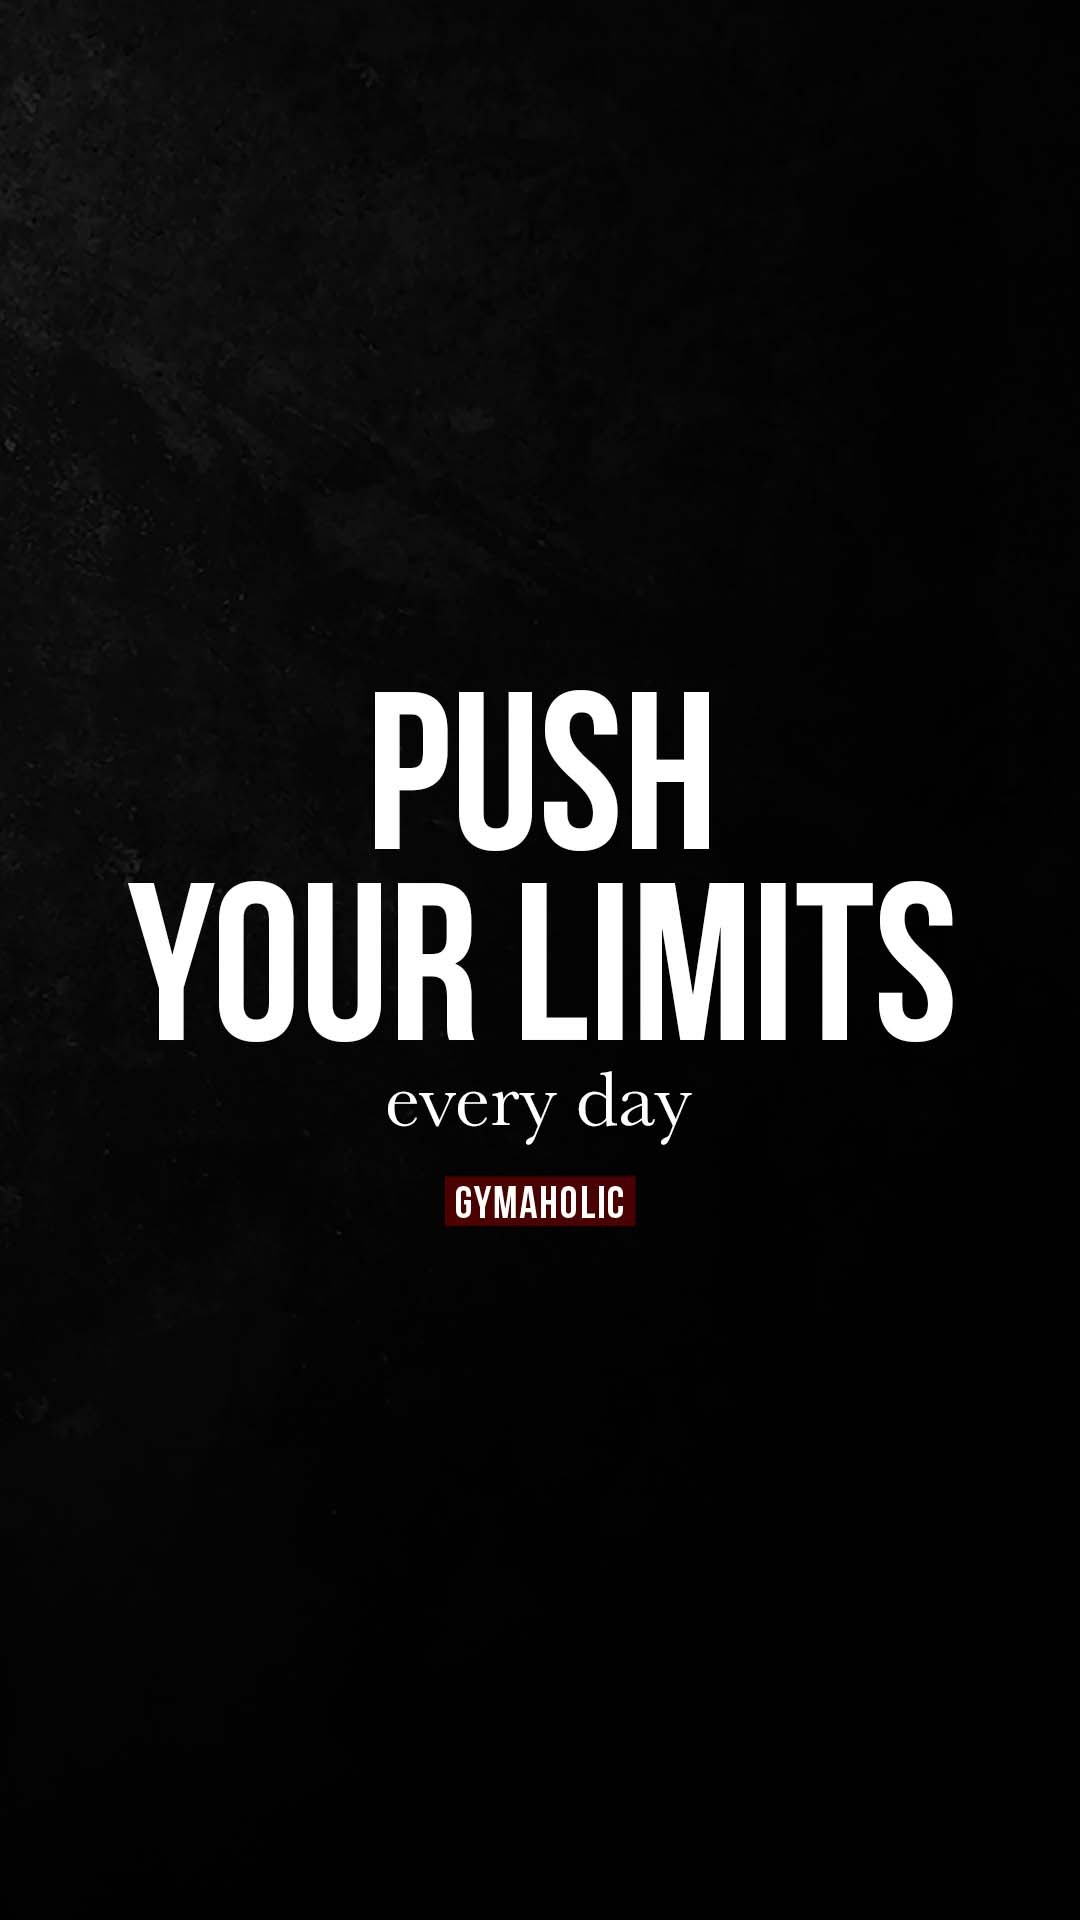 Push your limits every day